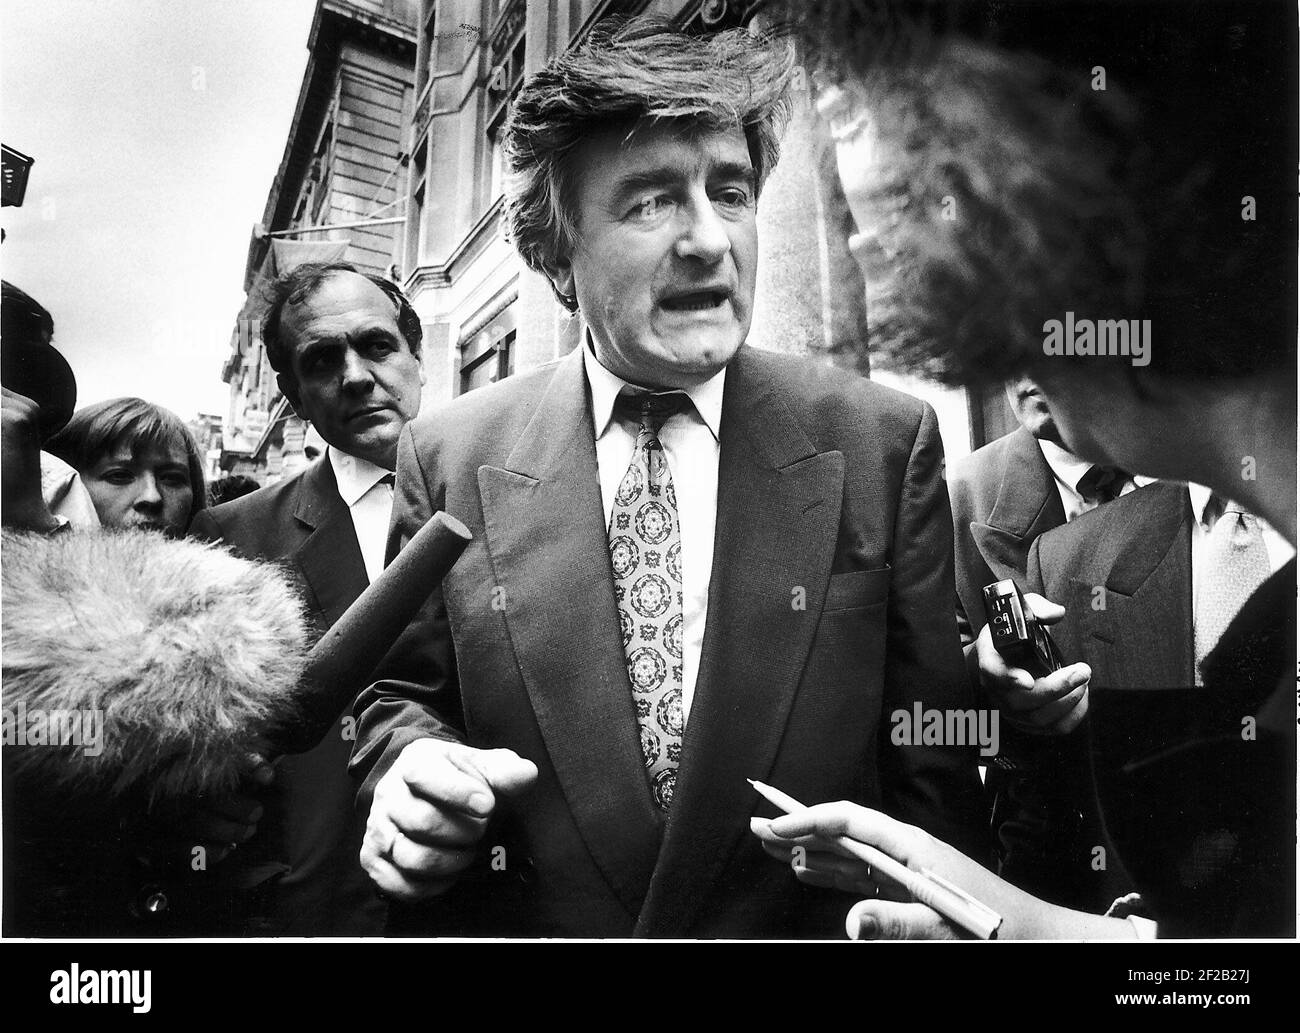 Radovan Karadzic Bosnian Serb Leader surrounded by journalists and talking to themDBase Stock Photo